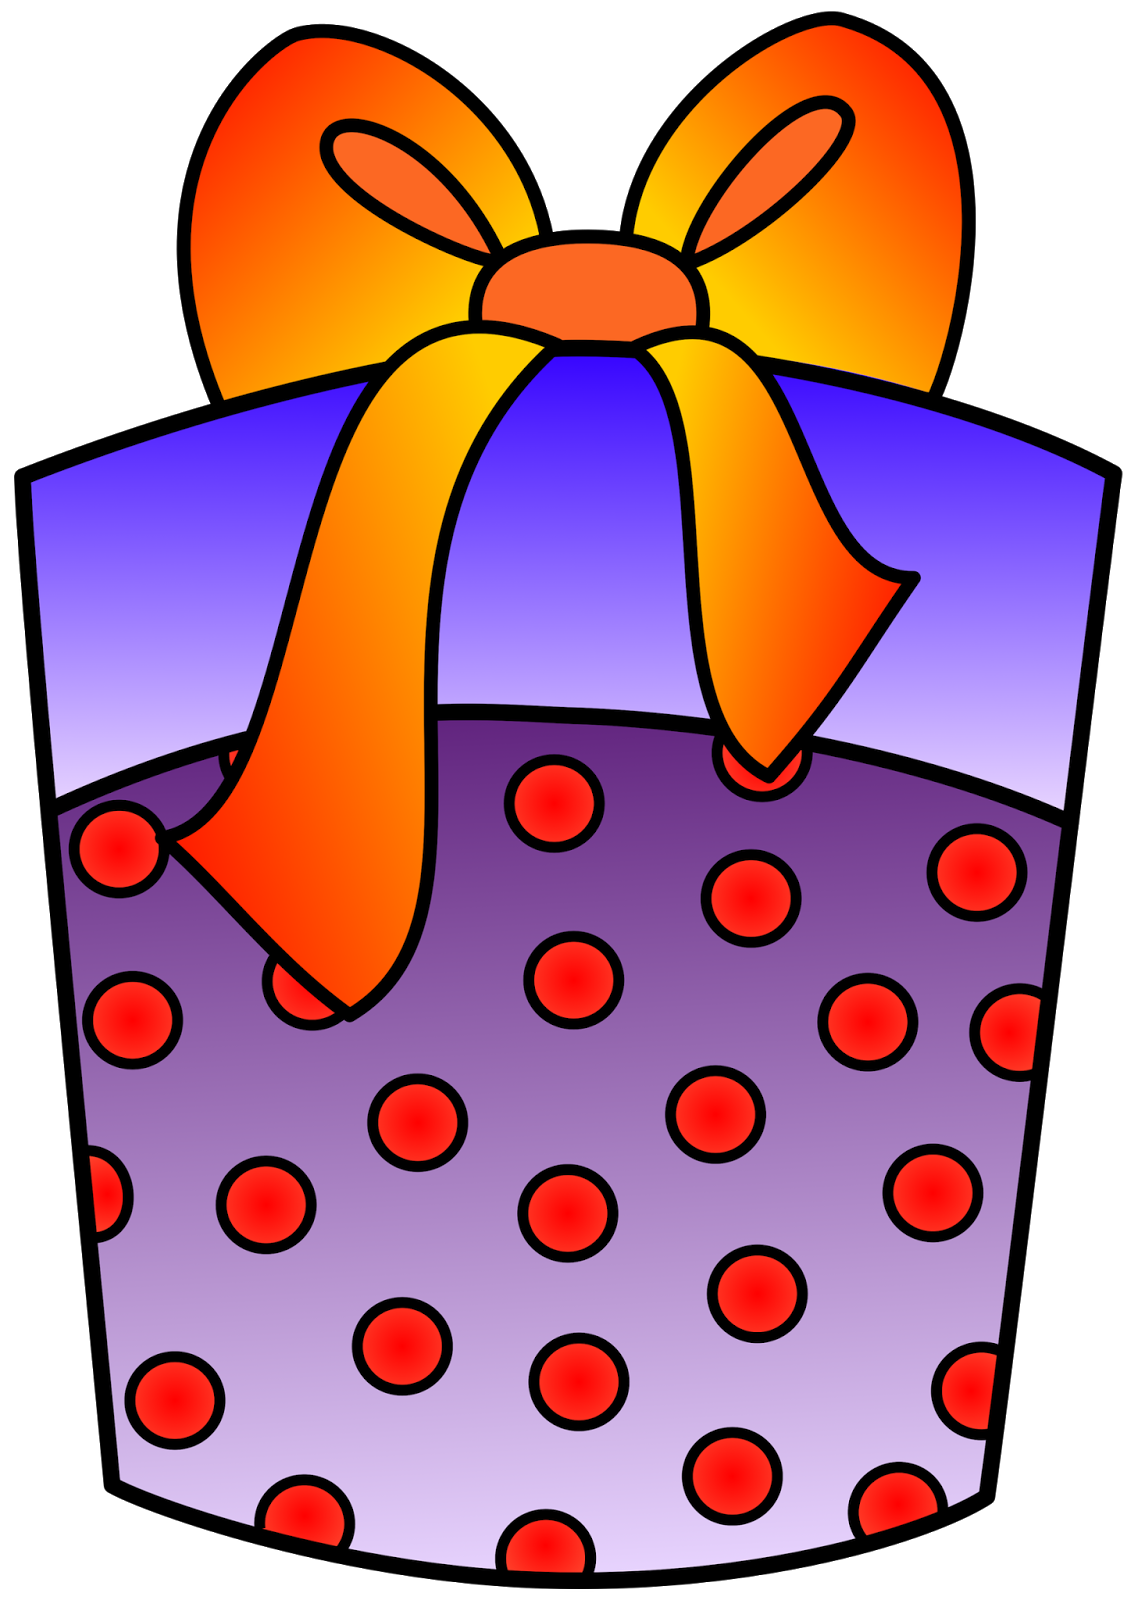 Birthday Present Clip Art - Free Clipart Images